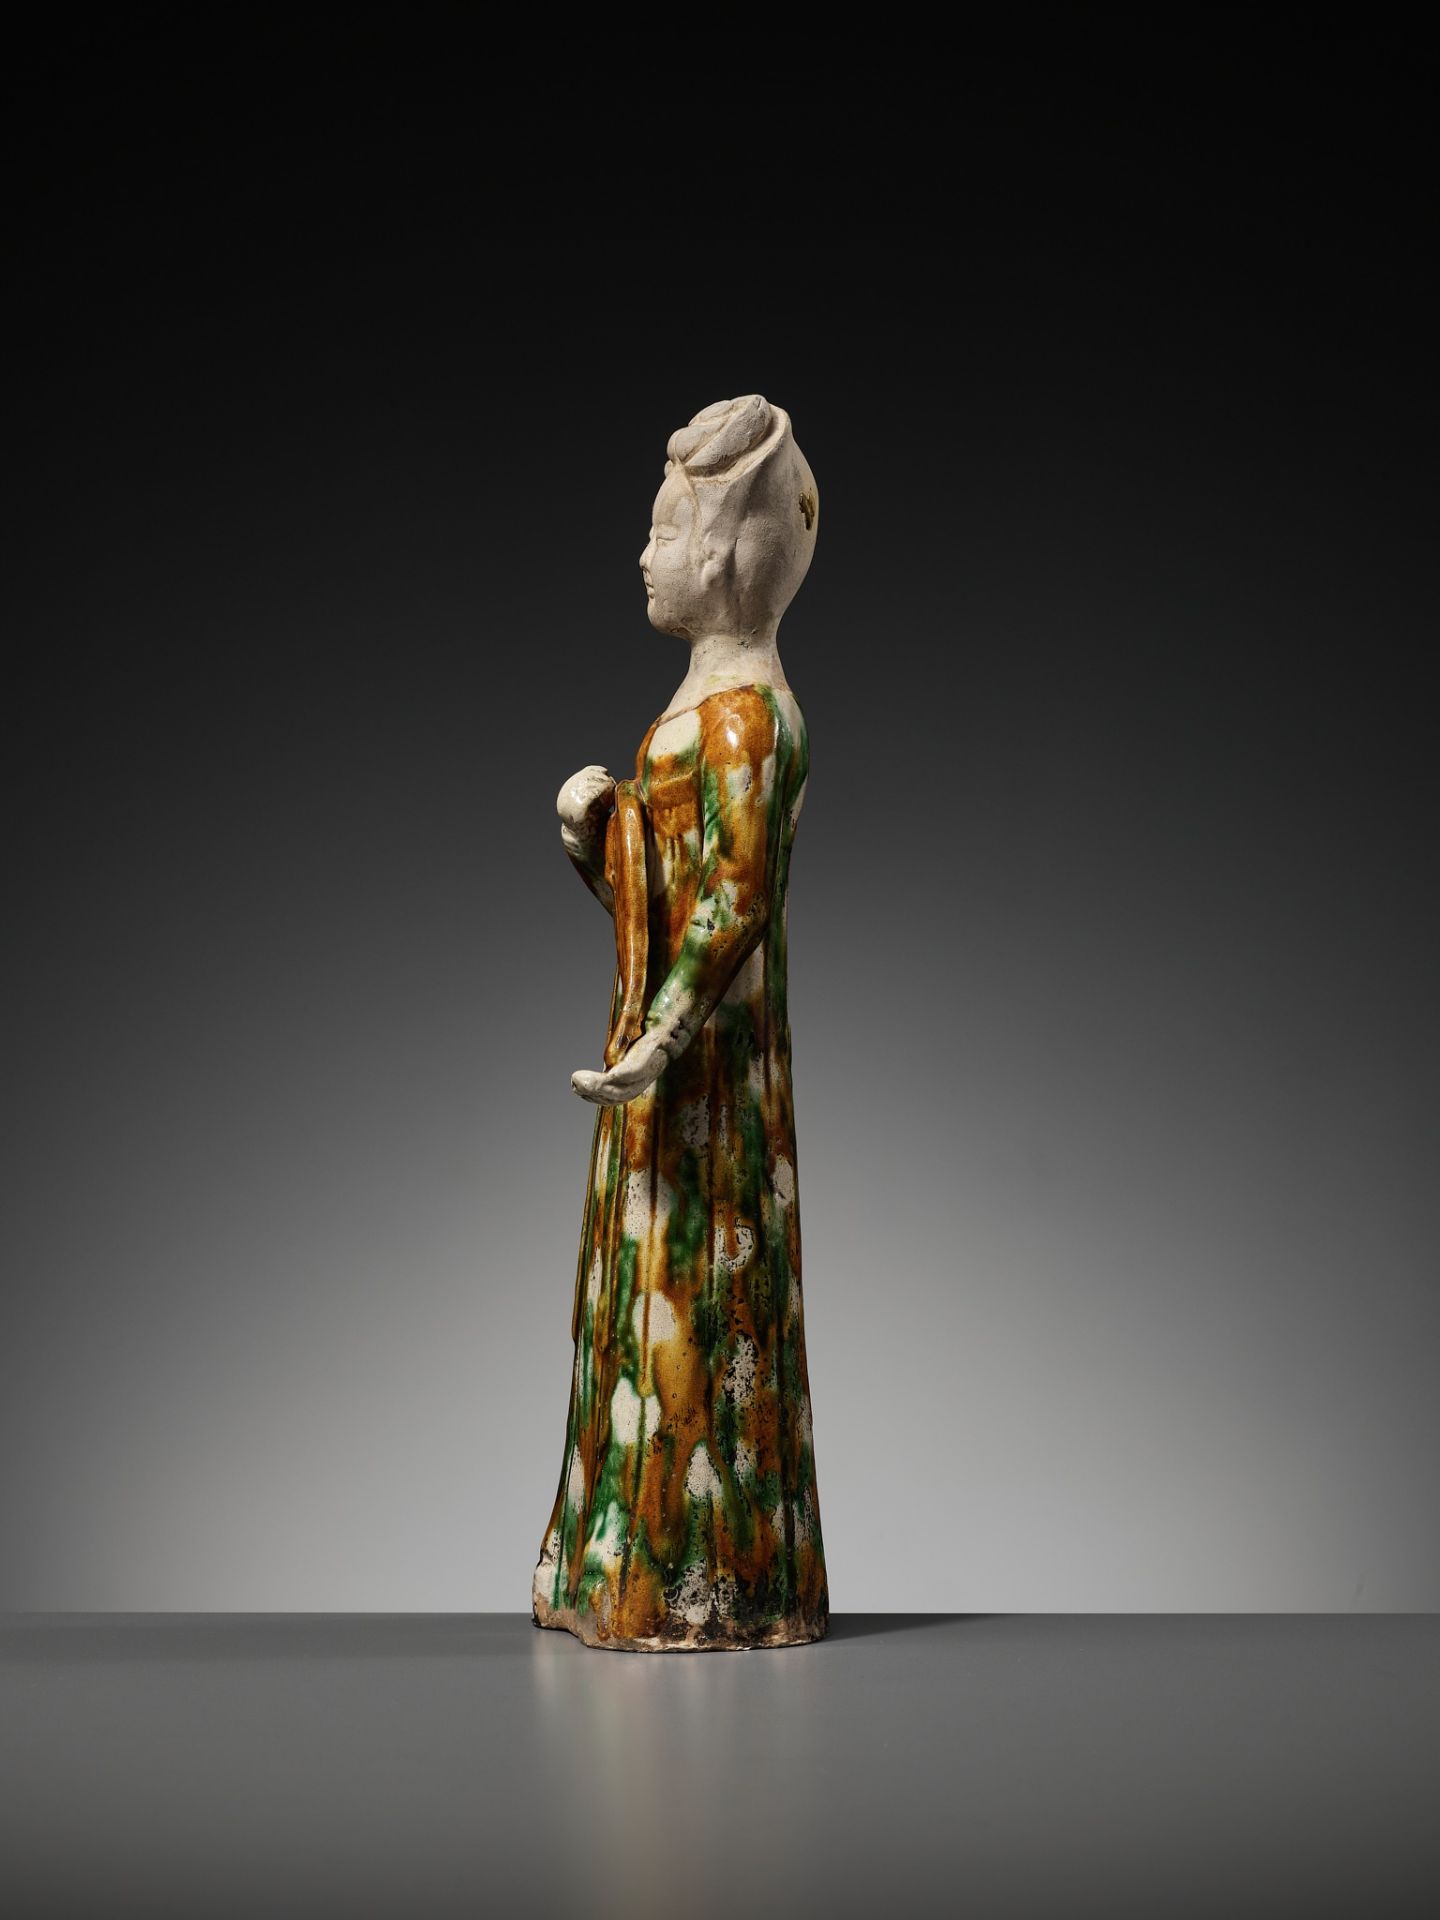 A SANCAI GLAZED POTTERY FIGURE OF A FEMALE MUSICIAN PLAYING THE PIPA, TANG DYNASTY - Image 6 of 13